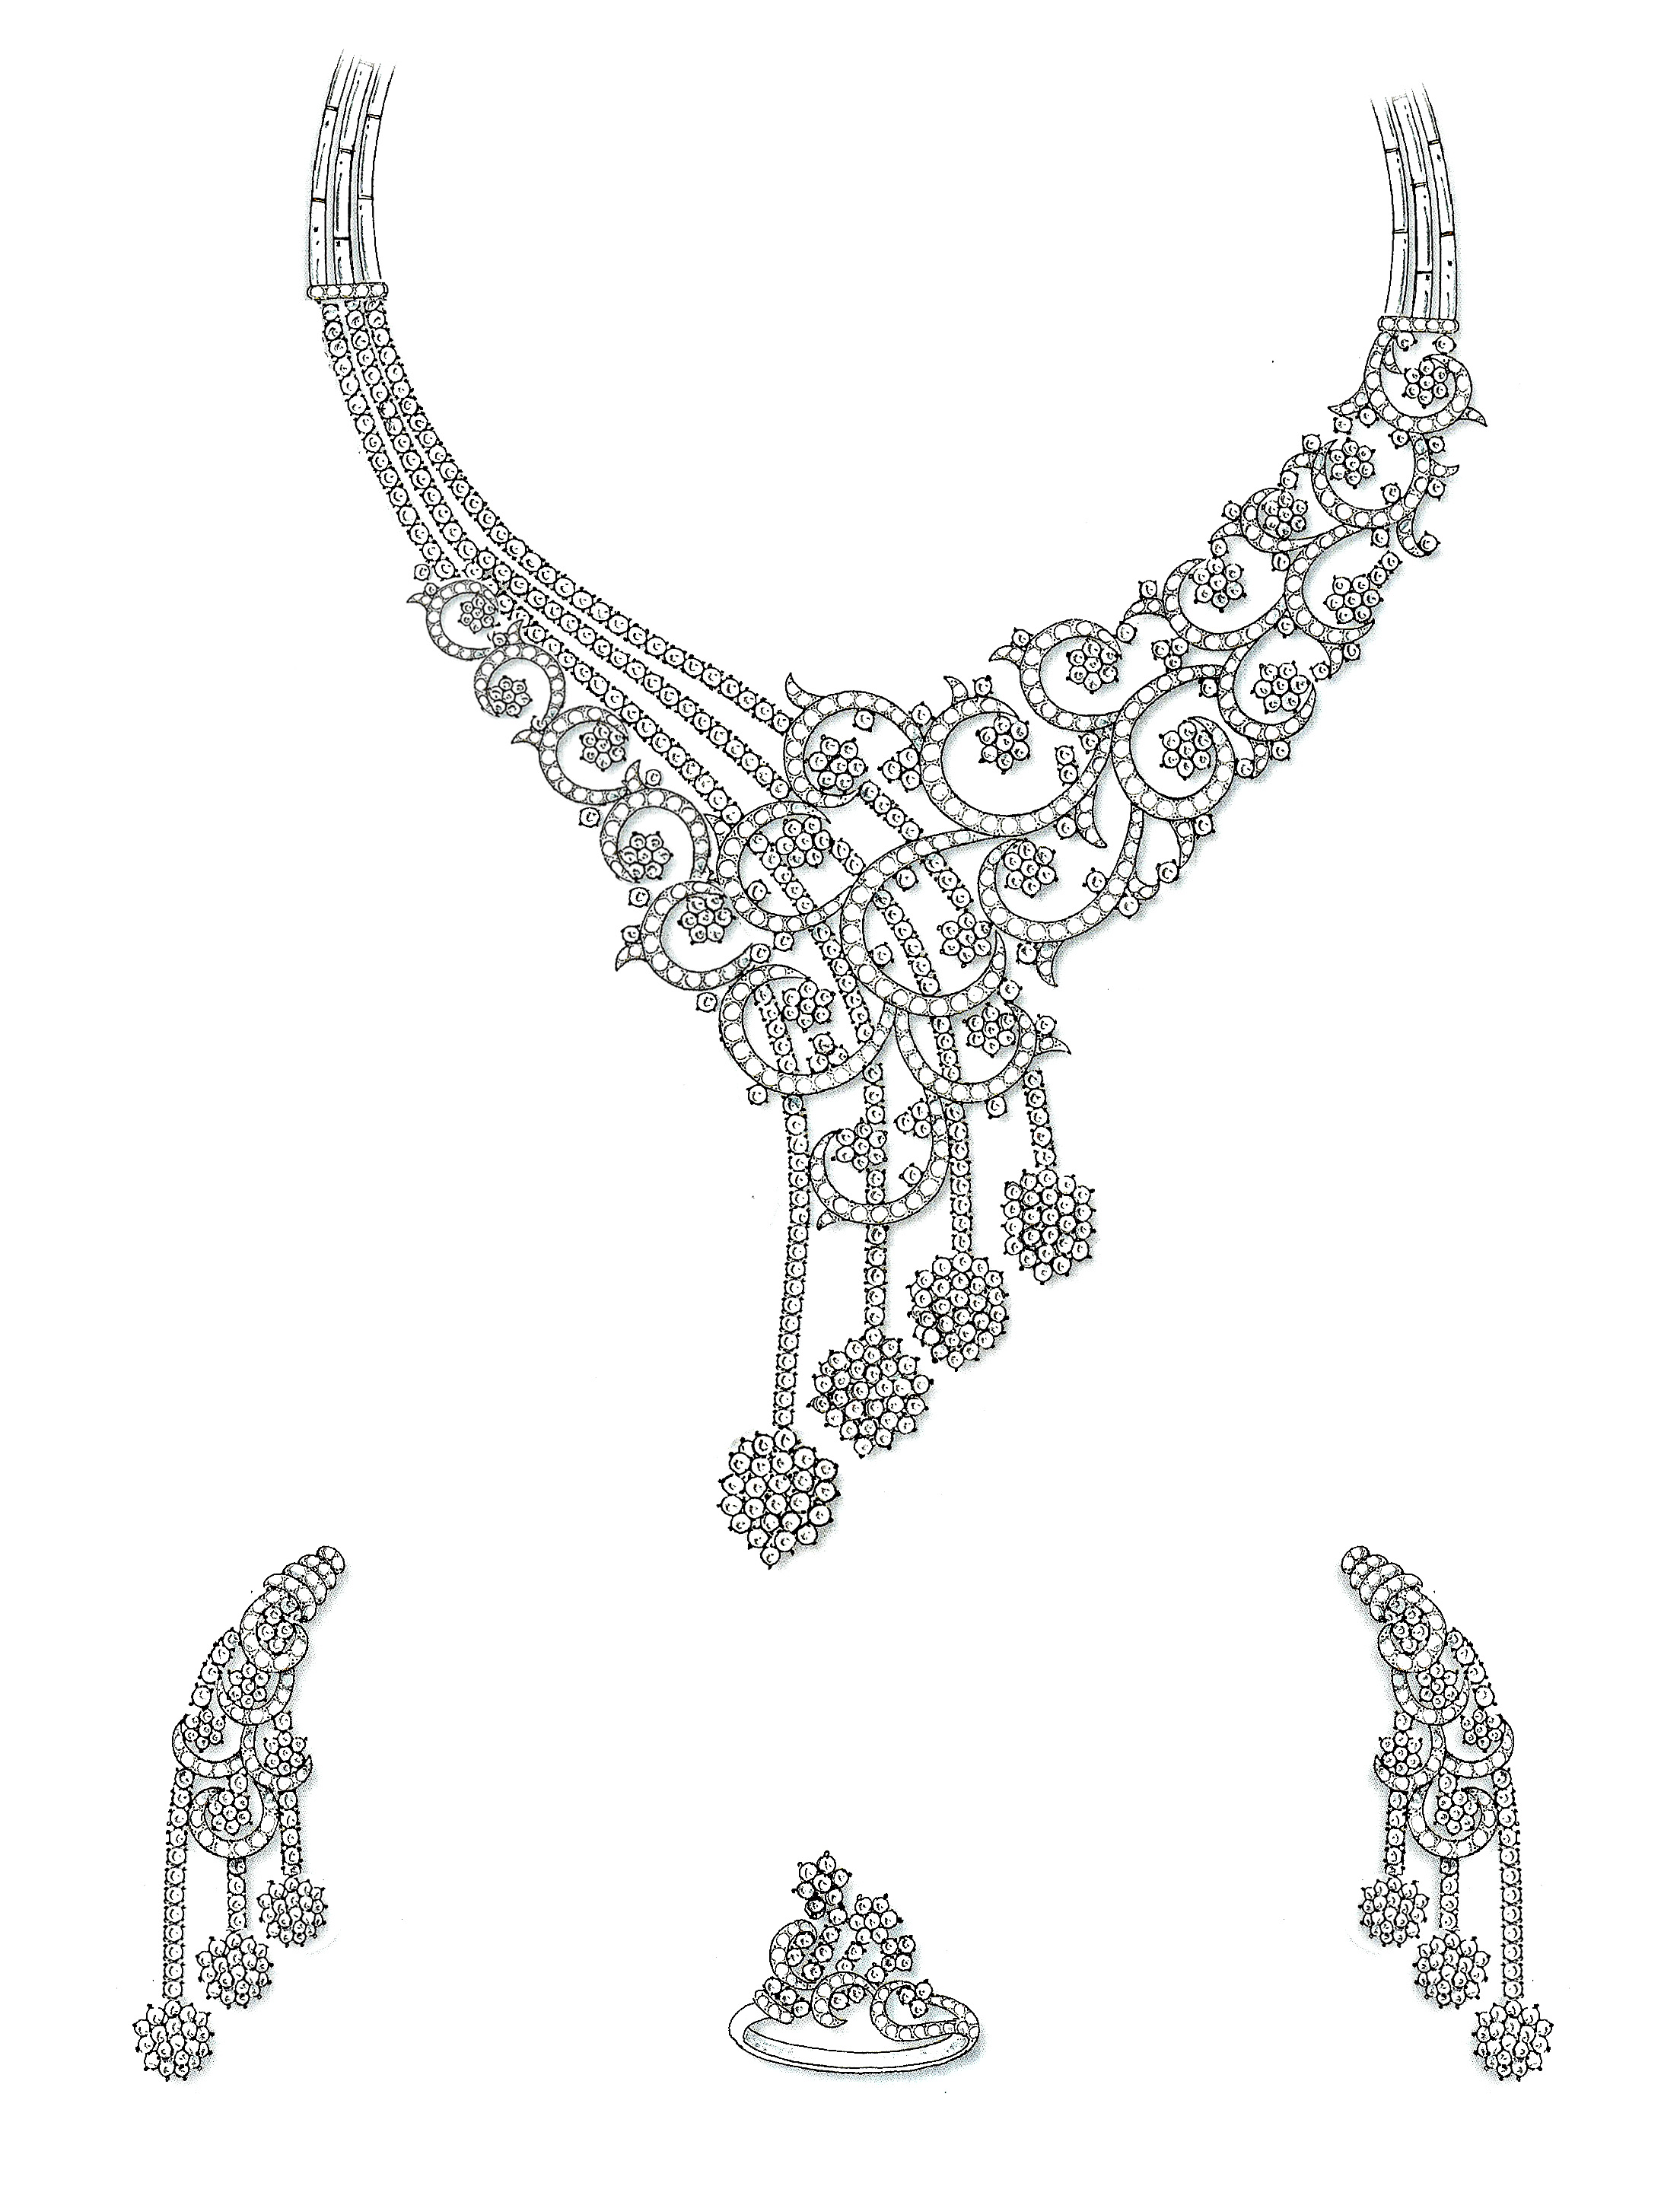 Jewelry Design. Pencil Drawing of a Necklace and a Ring with Precious  Stones on a Grey Background Stock Illustration - Illustration of drawn,  design: 176228050